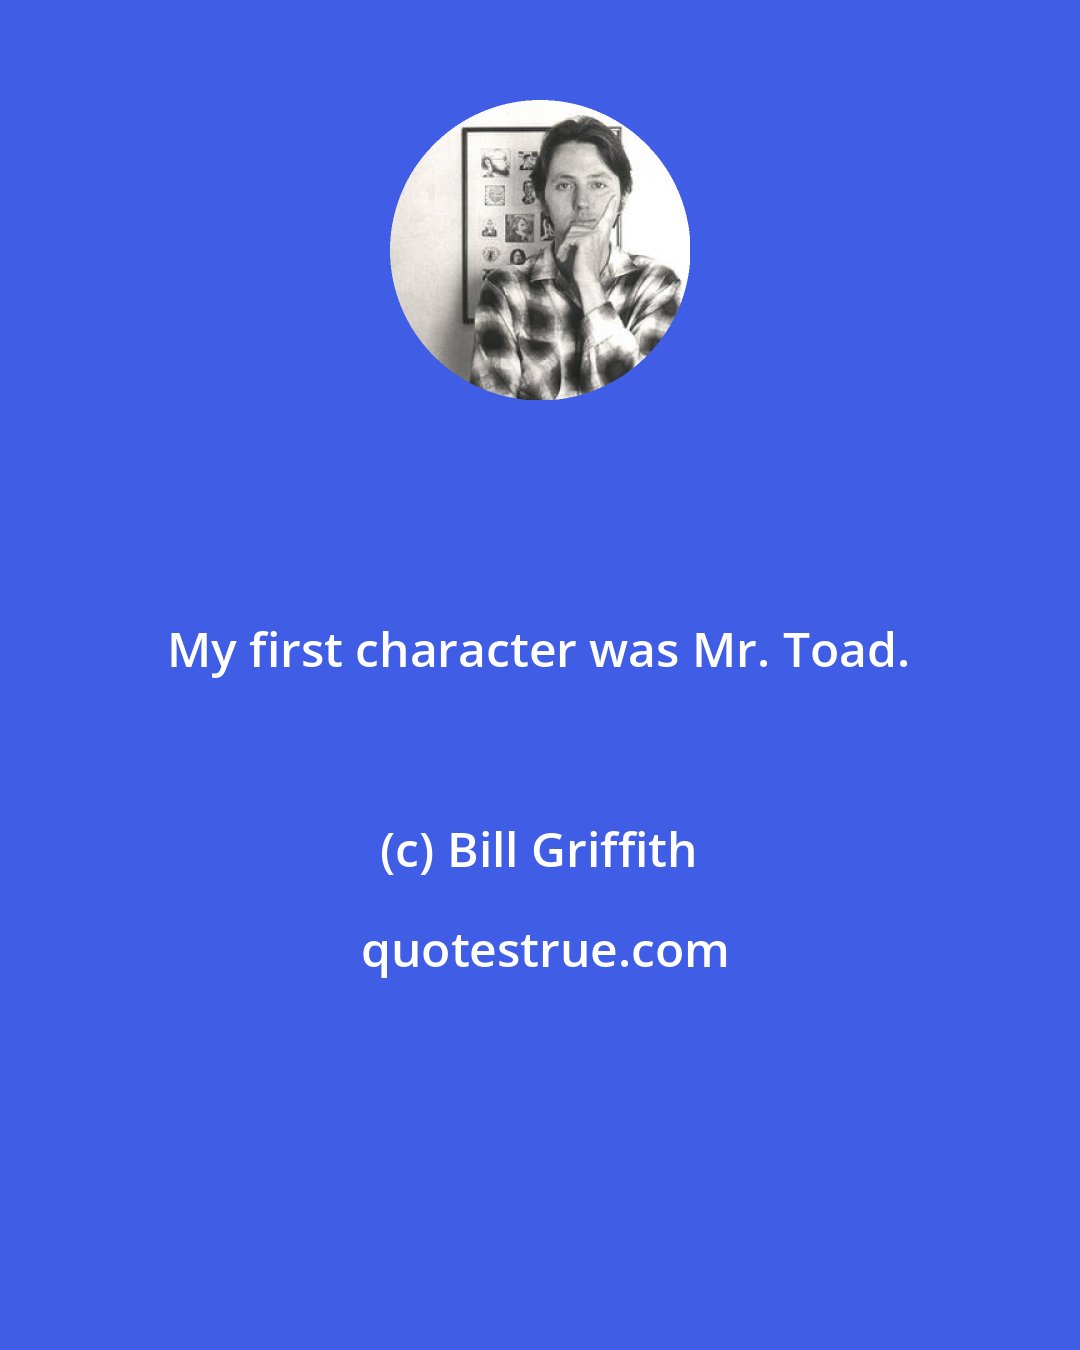 Bill Griffith: My first character was Mr. Toad.